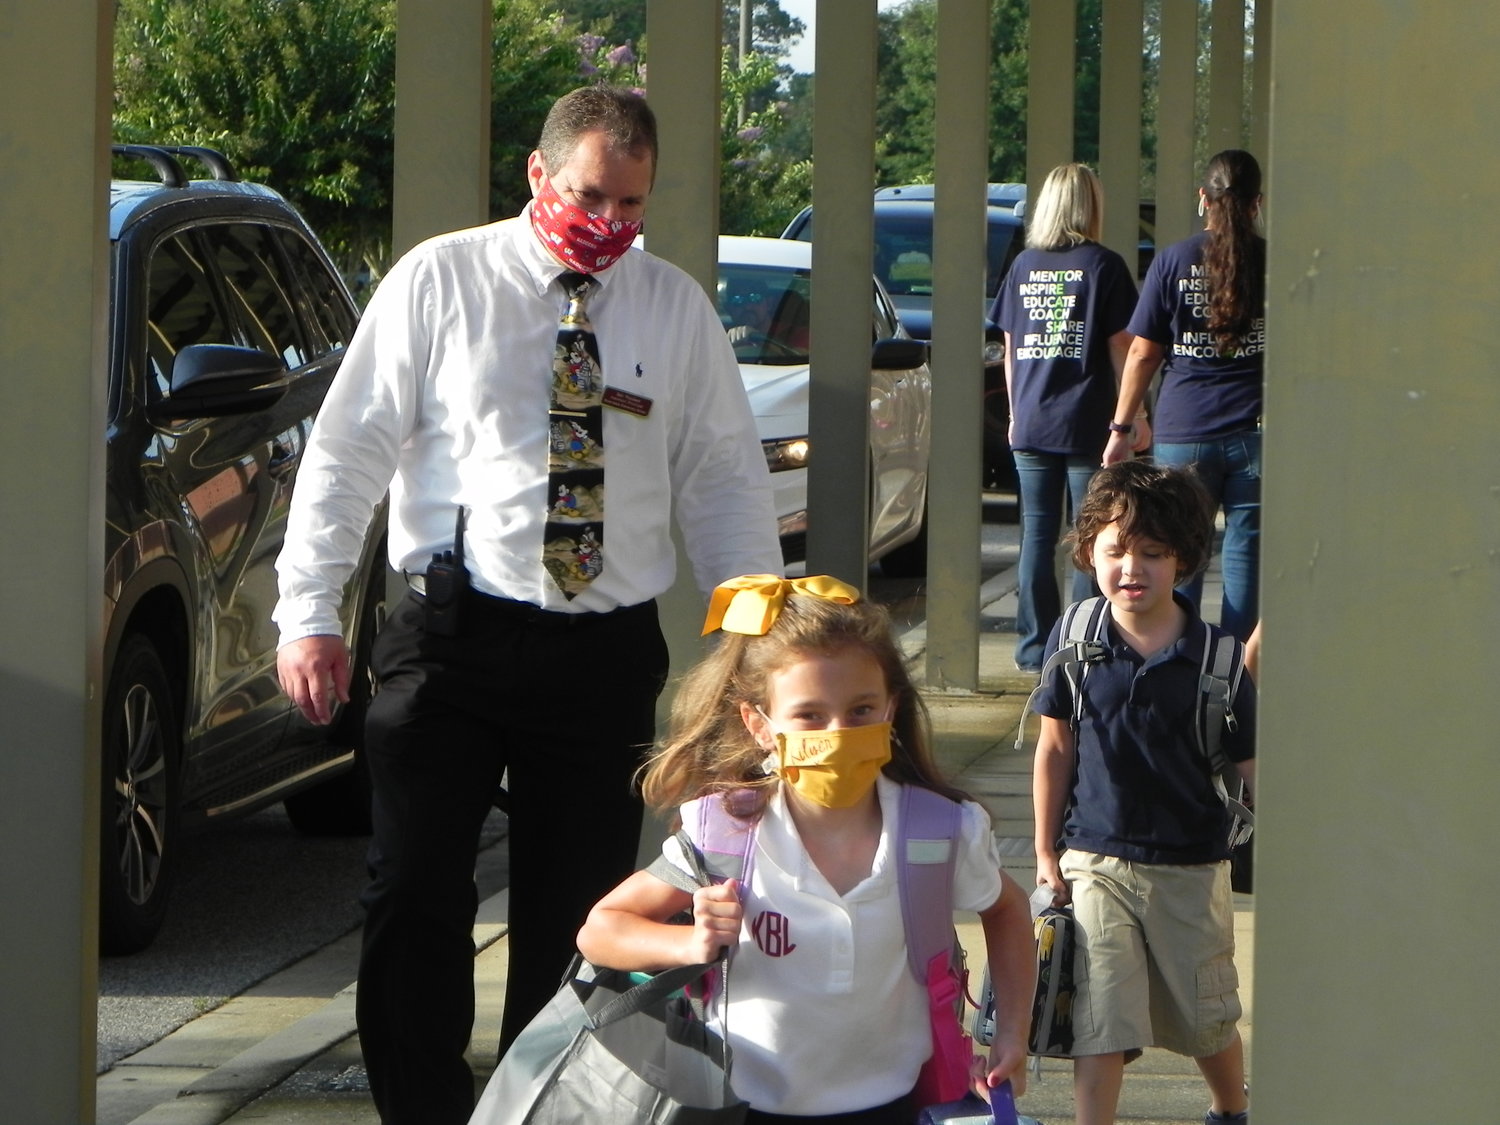 Robertsdale Elementary School Assistant Principal Robert Weichert greets students on the first day of school Wednesday.